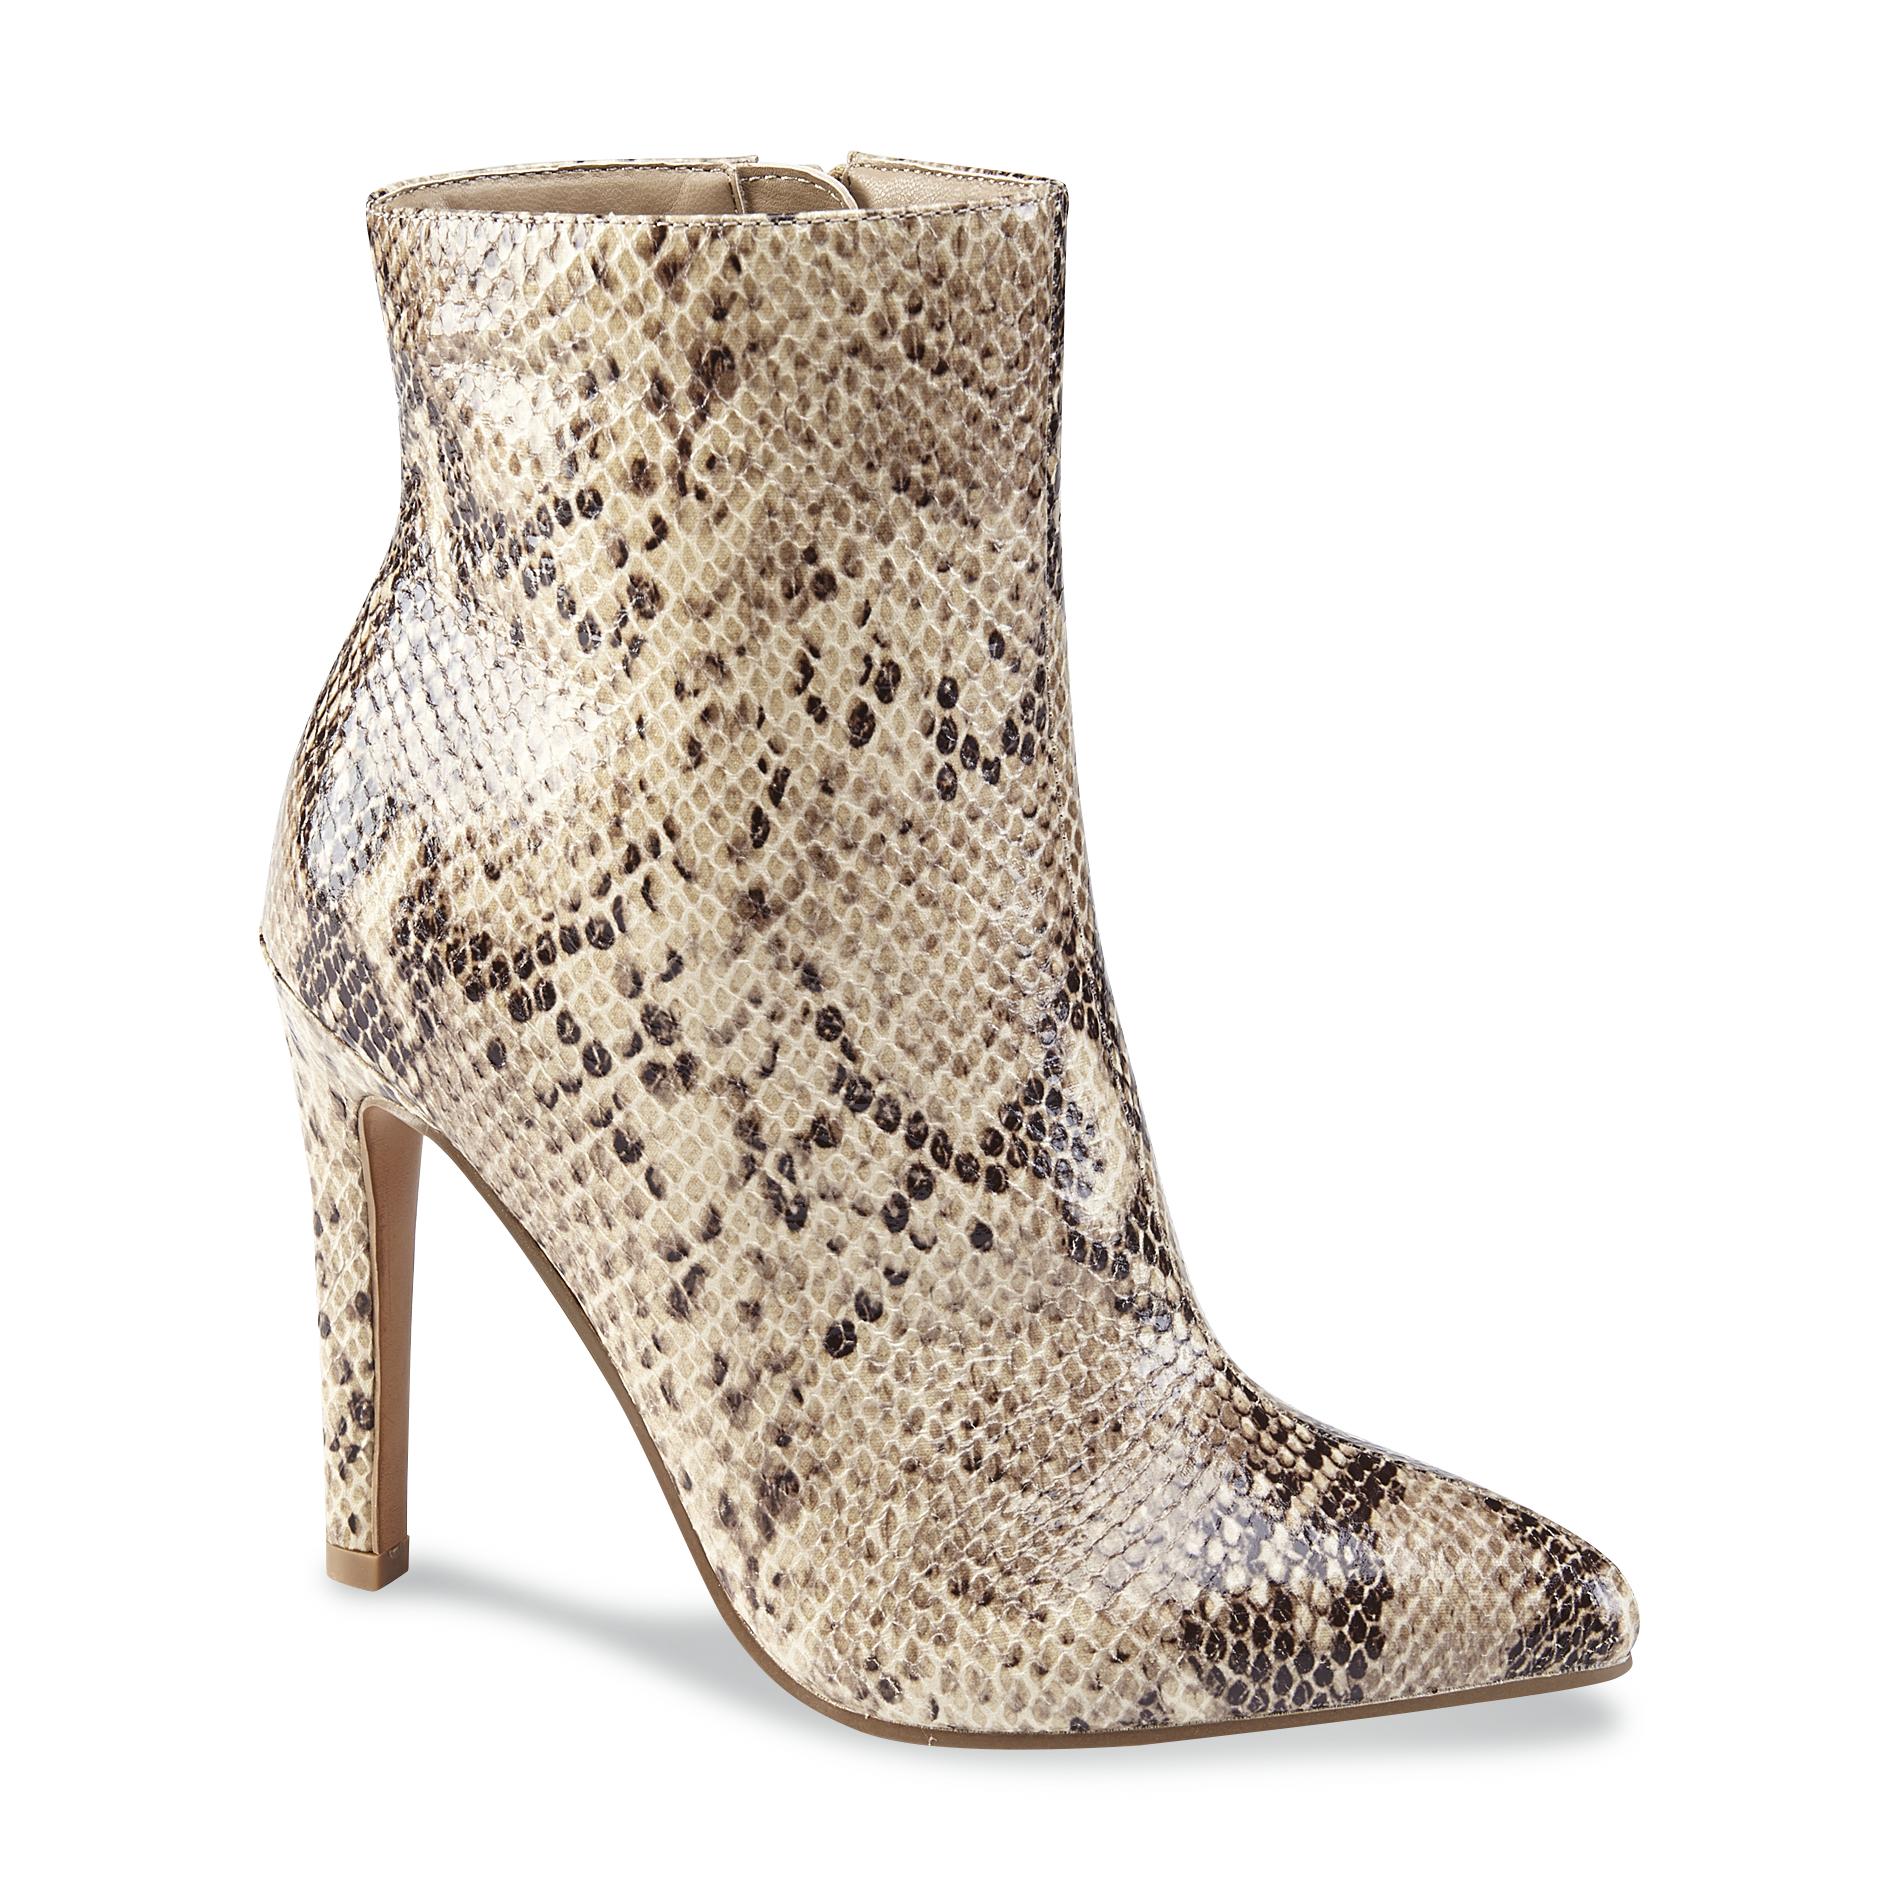 Metaphor Women's Slither Brown/Synthetic Snakeskin Ankle Boot